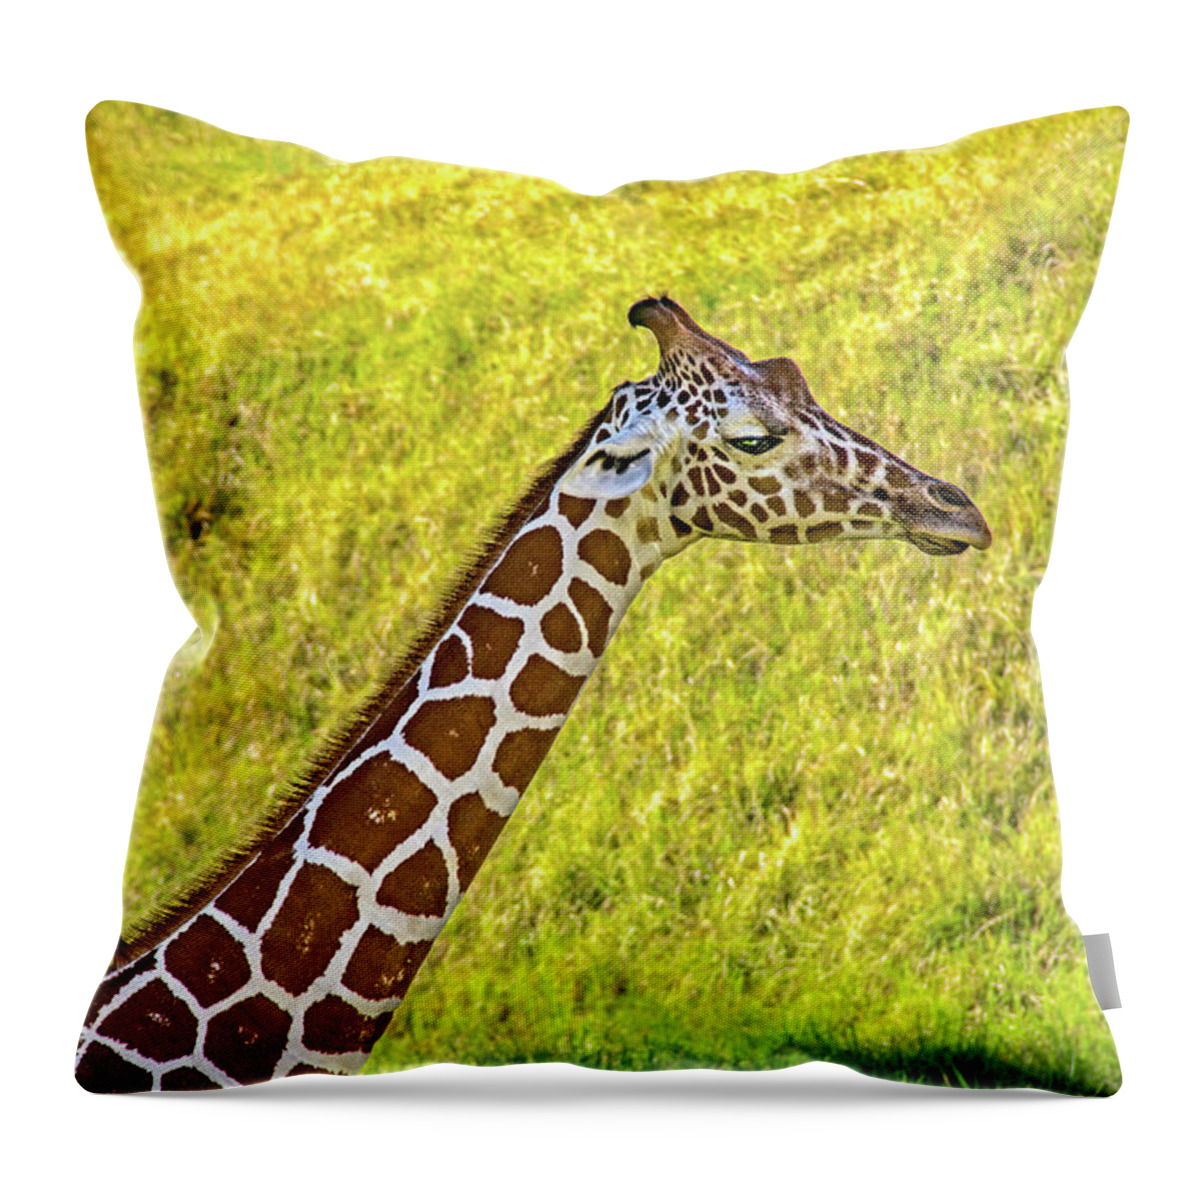 African Throw Pillow featuring the photograph Giraffe by Roslyn Wilkins